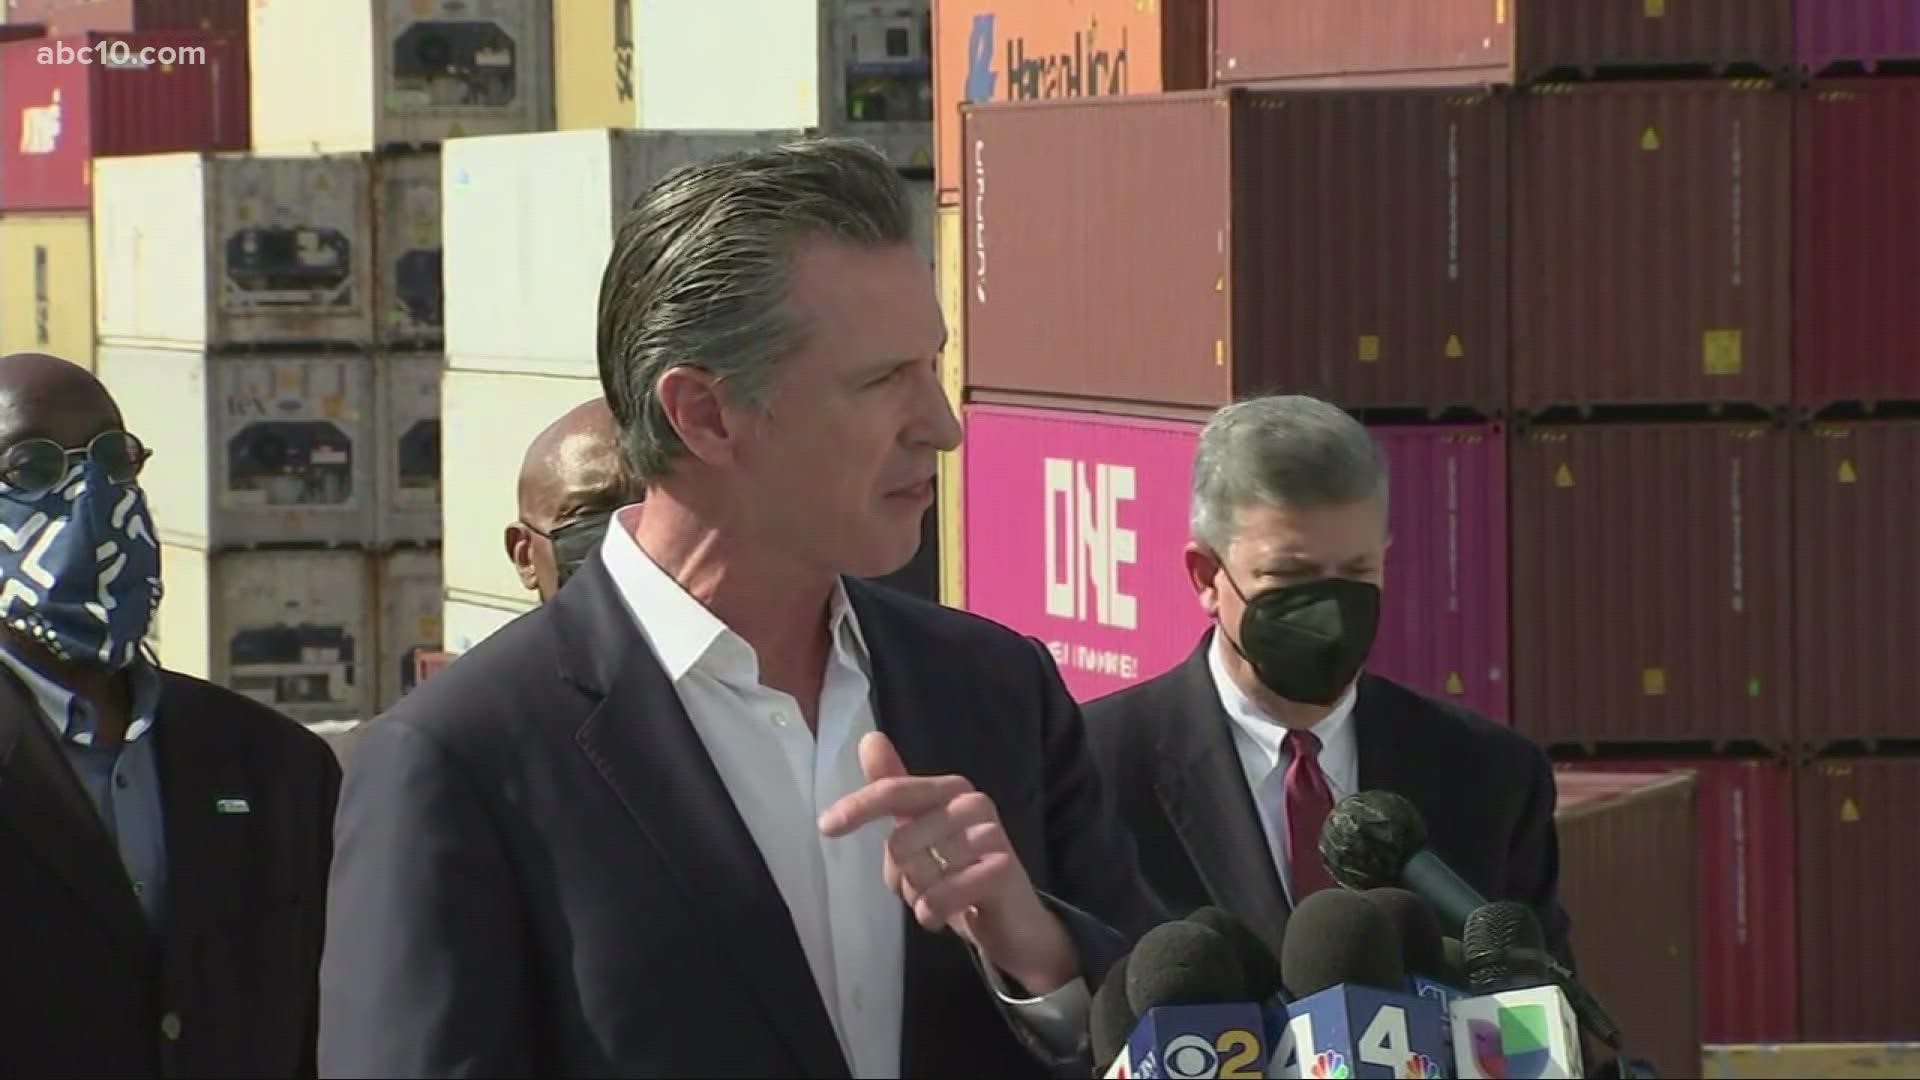 Today, Gov. Newsom was in Los Angeles, CA speaking about the ships stuck in the water and his plans to decrease the stress.